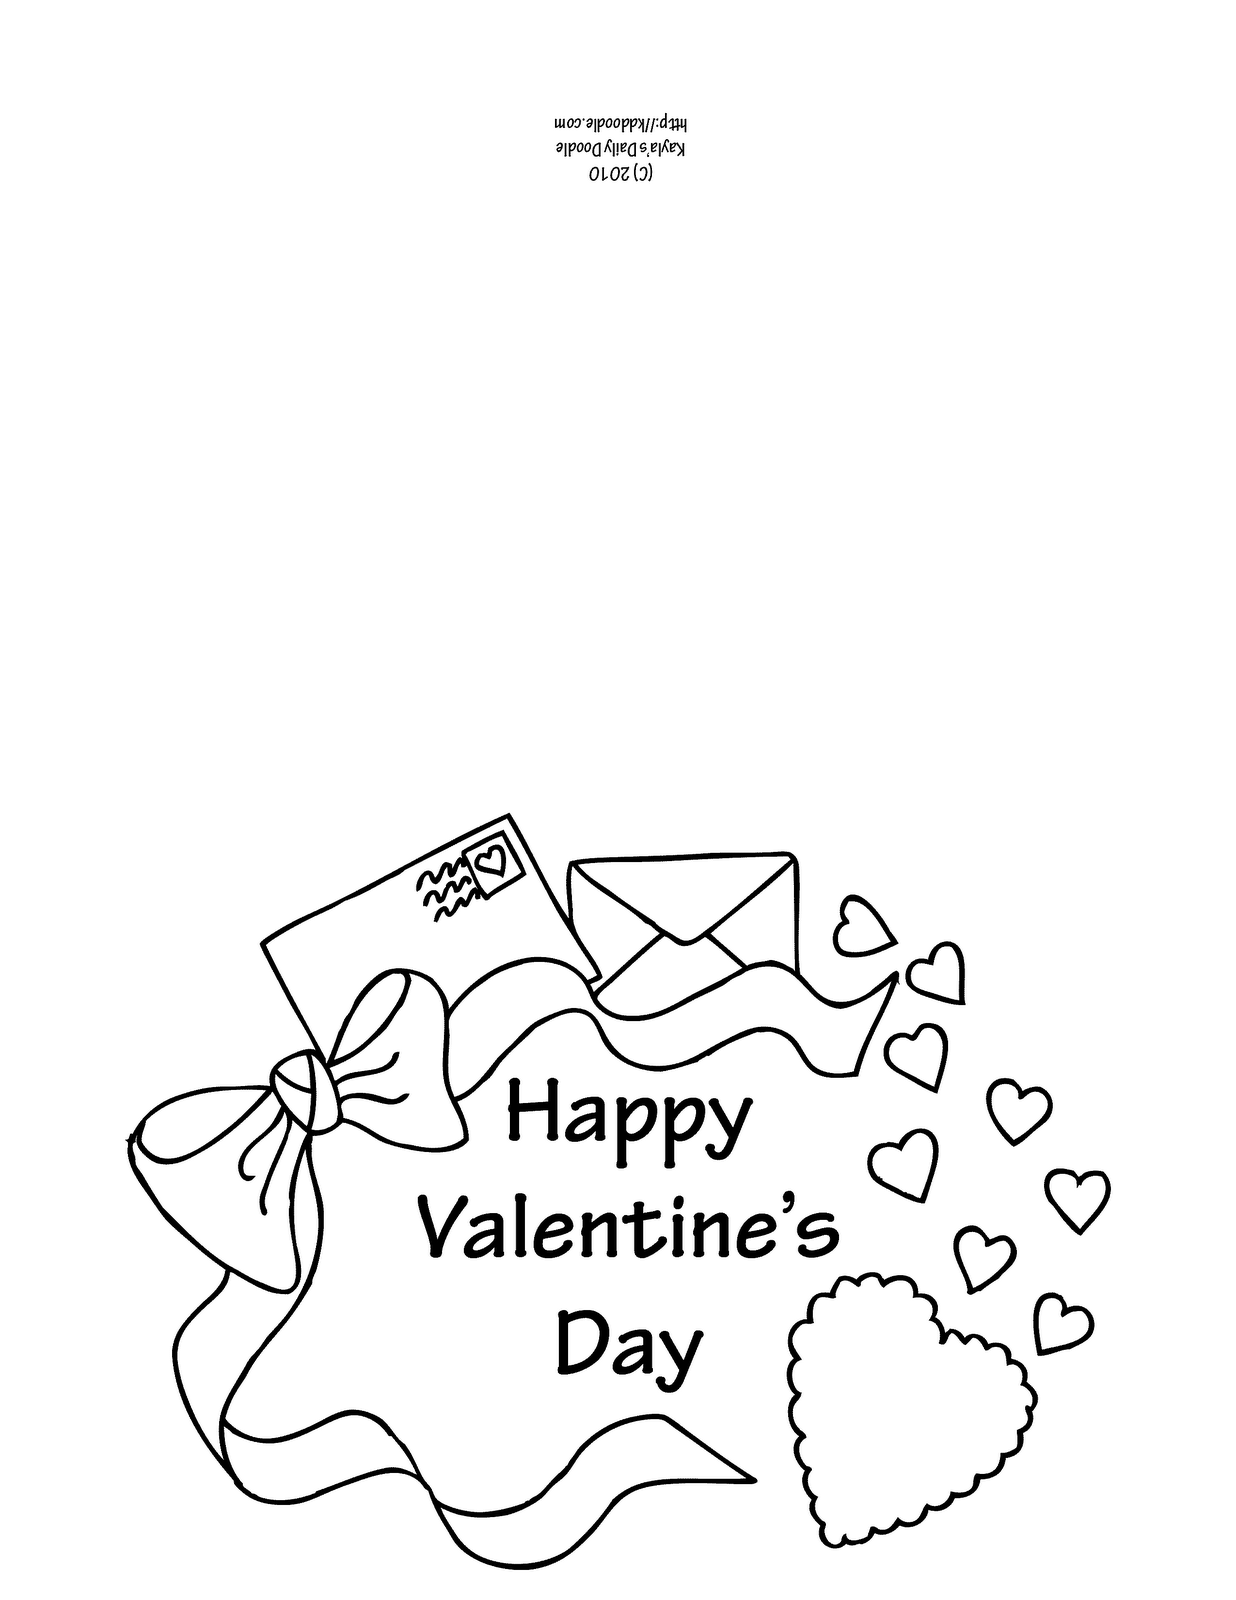 Coloring Valentine's Day Cards 8